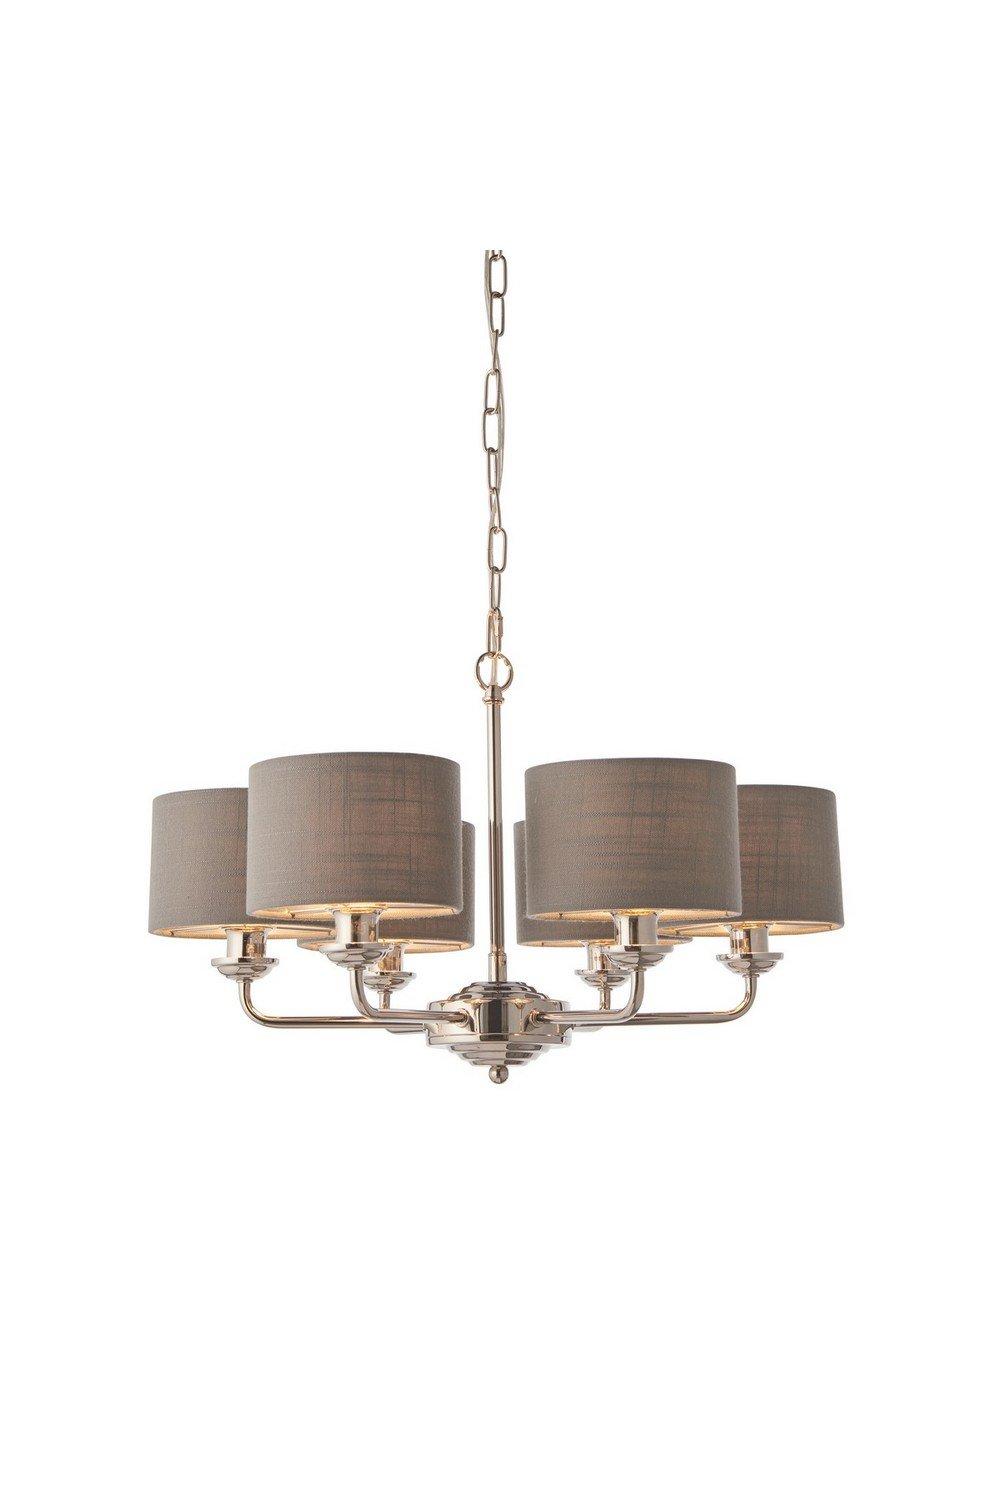 Highclere Pendant Light Bright Nickel Plate Charcoal Fabric Multi Arm Shade